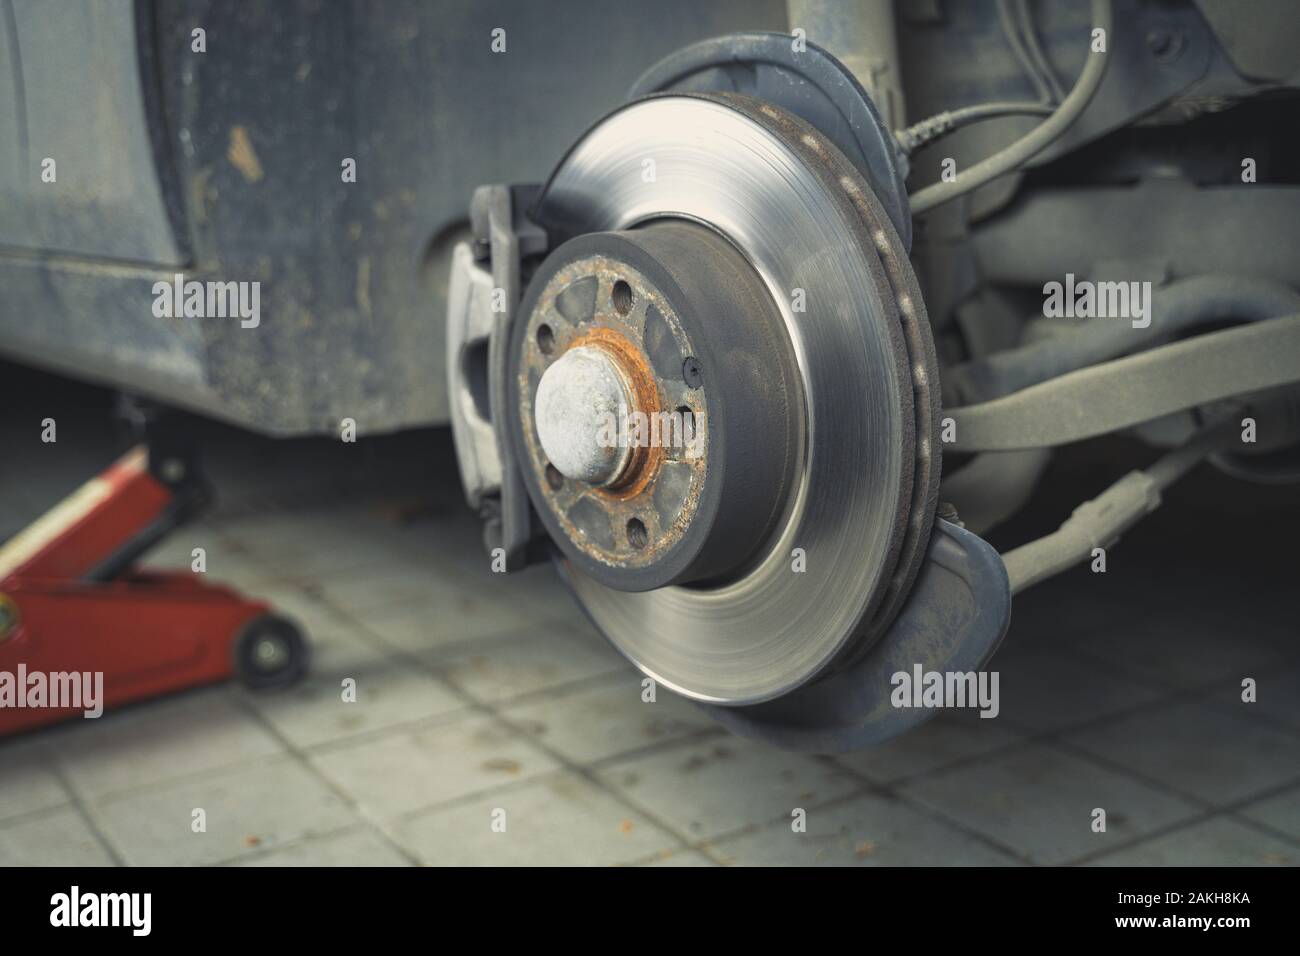 Car without wheel and lift up by hydraulic, waiting for tire replacement in a garage. Stock Photo